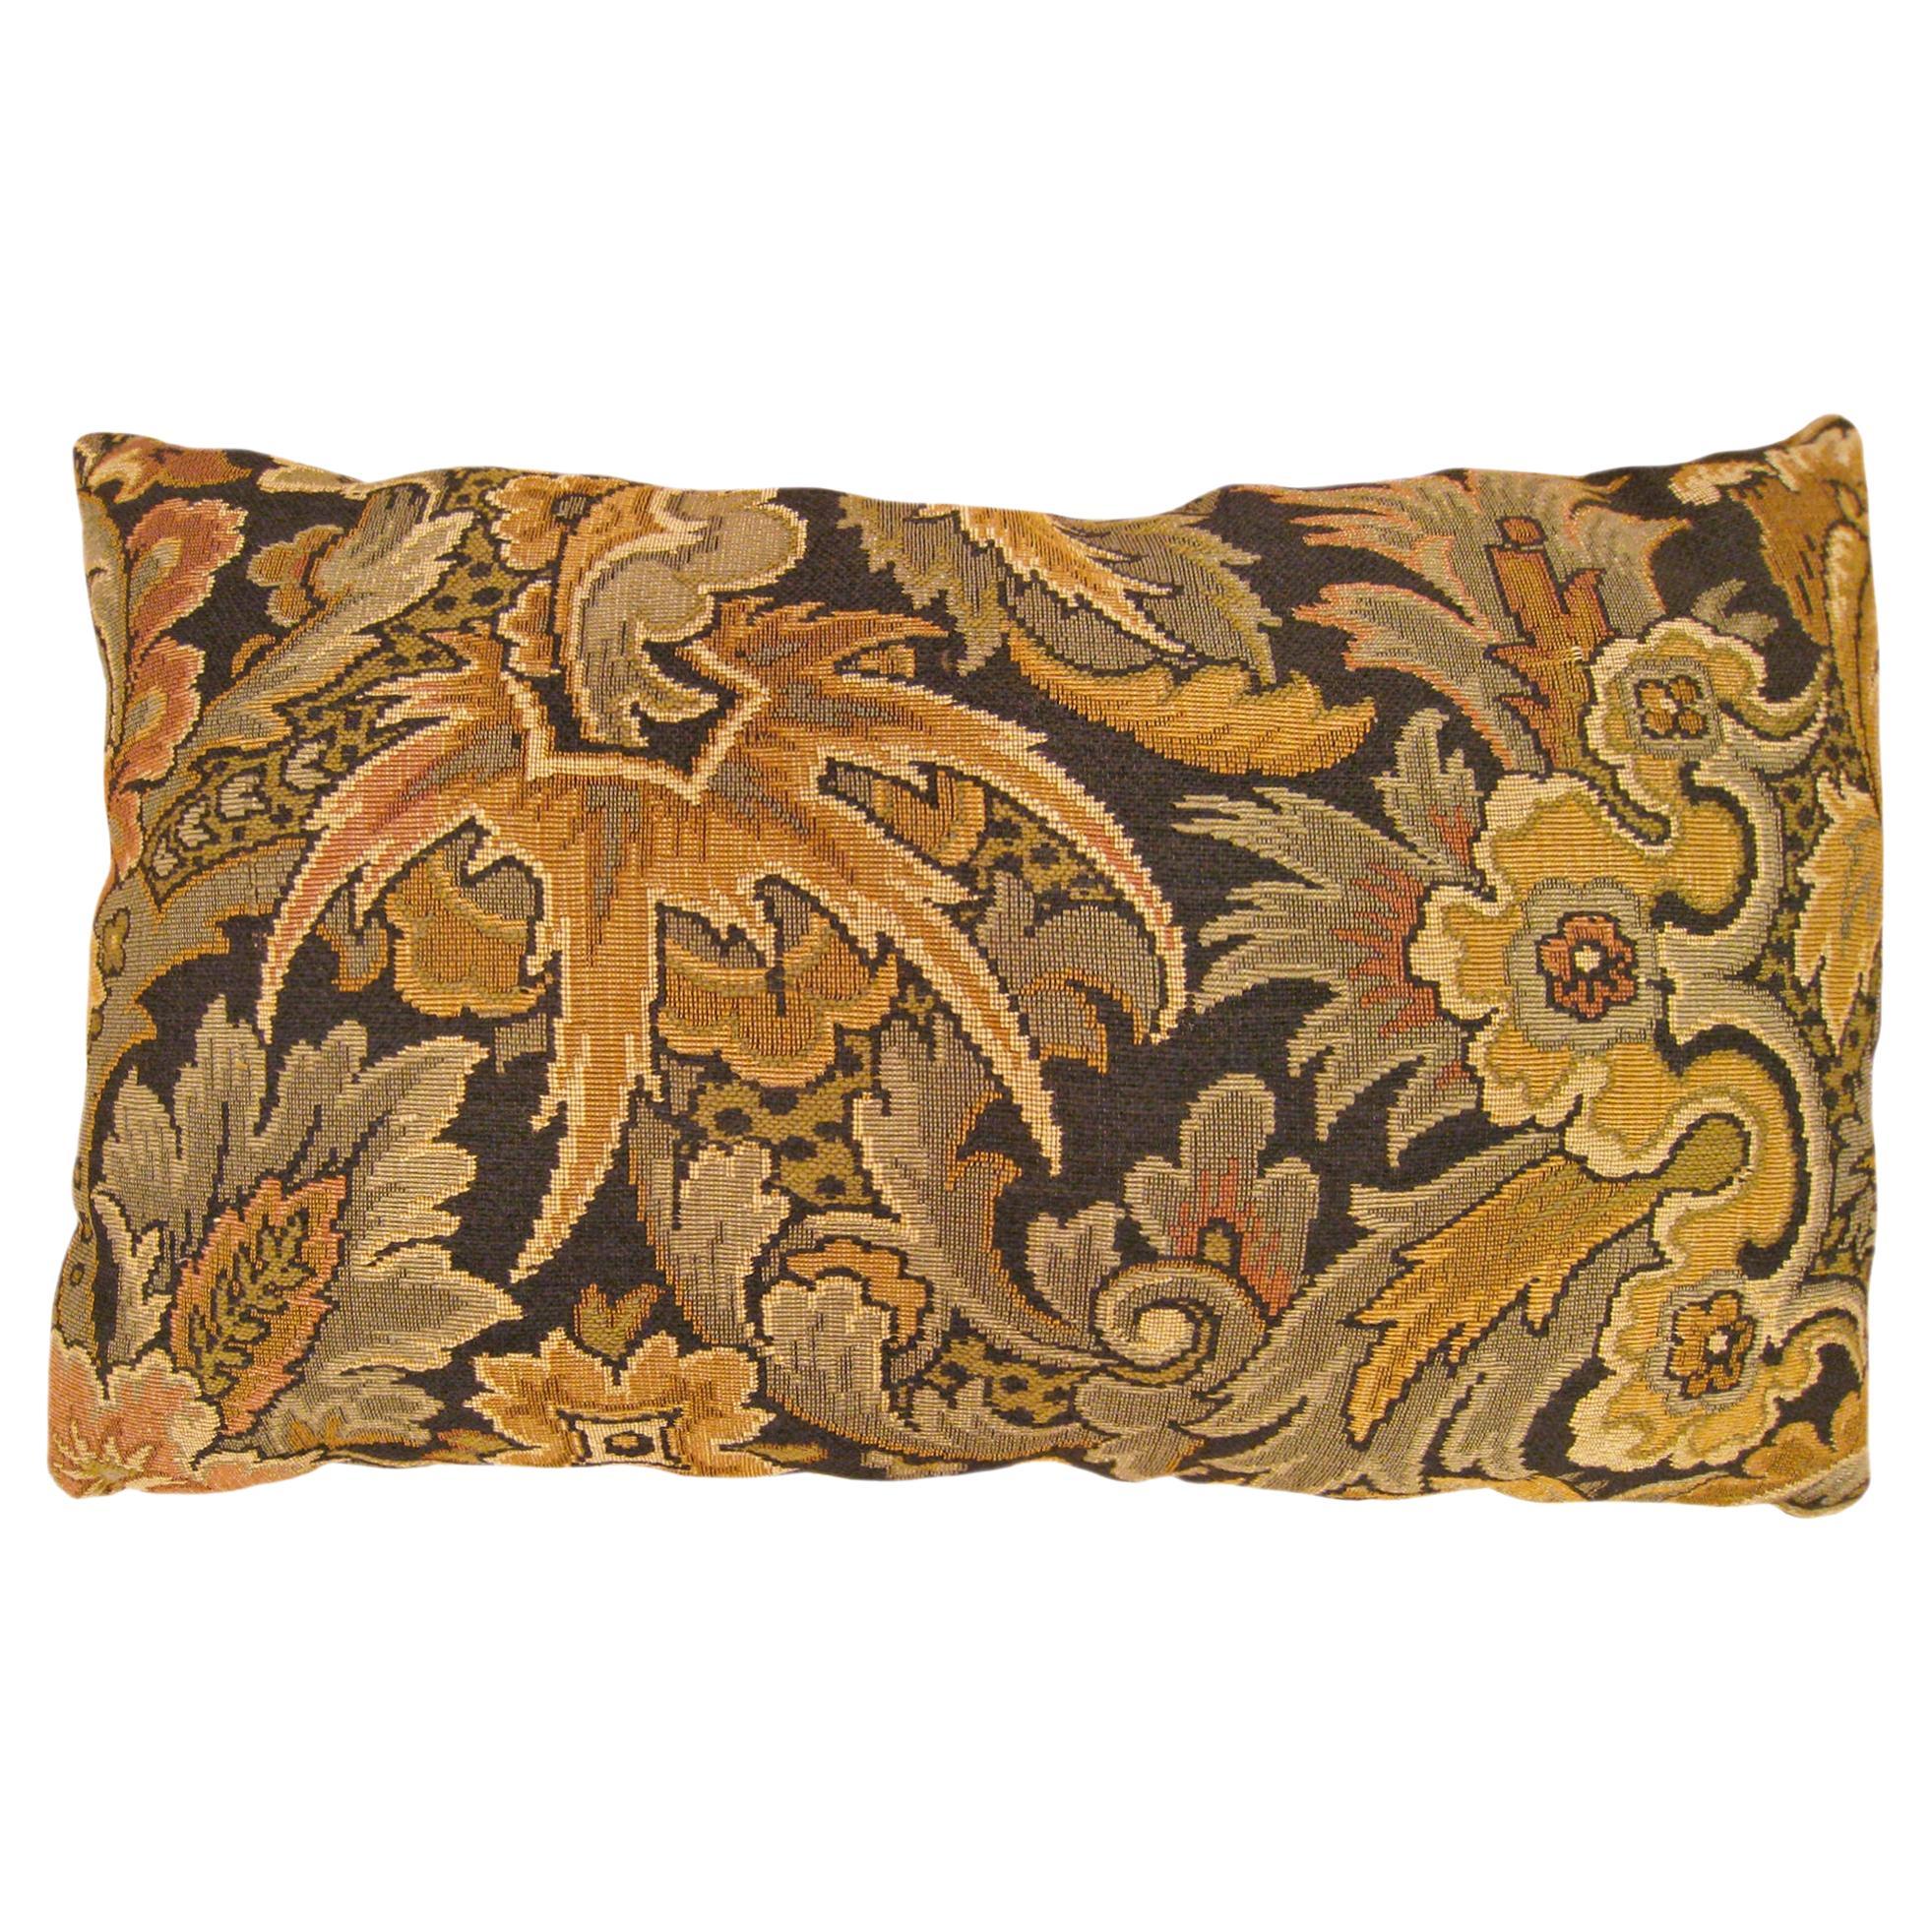 Decorative Antique Jacquard Tapestry Pillow with Floral Elements For Sale